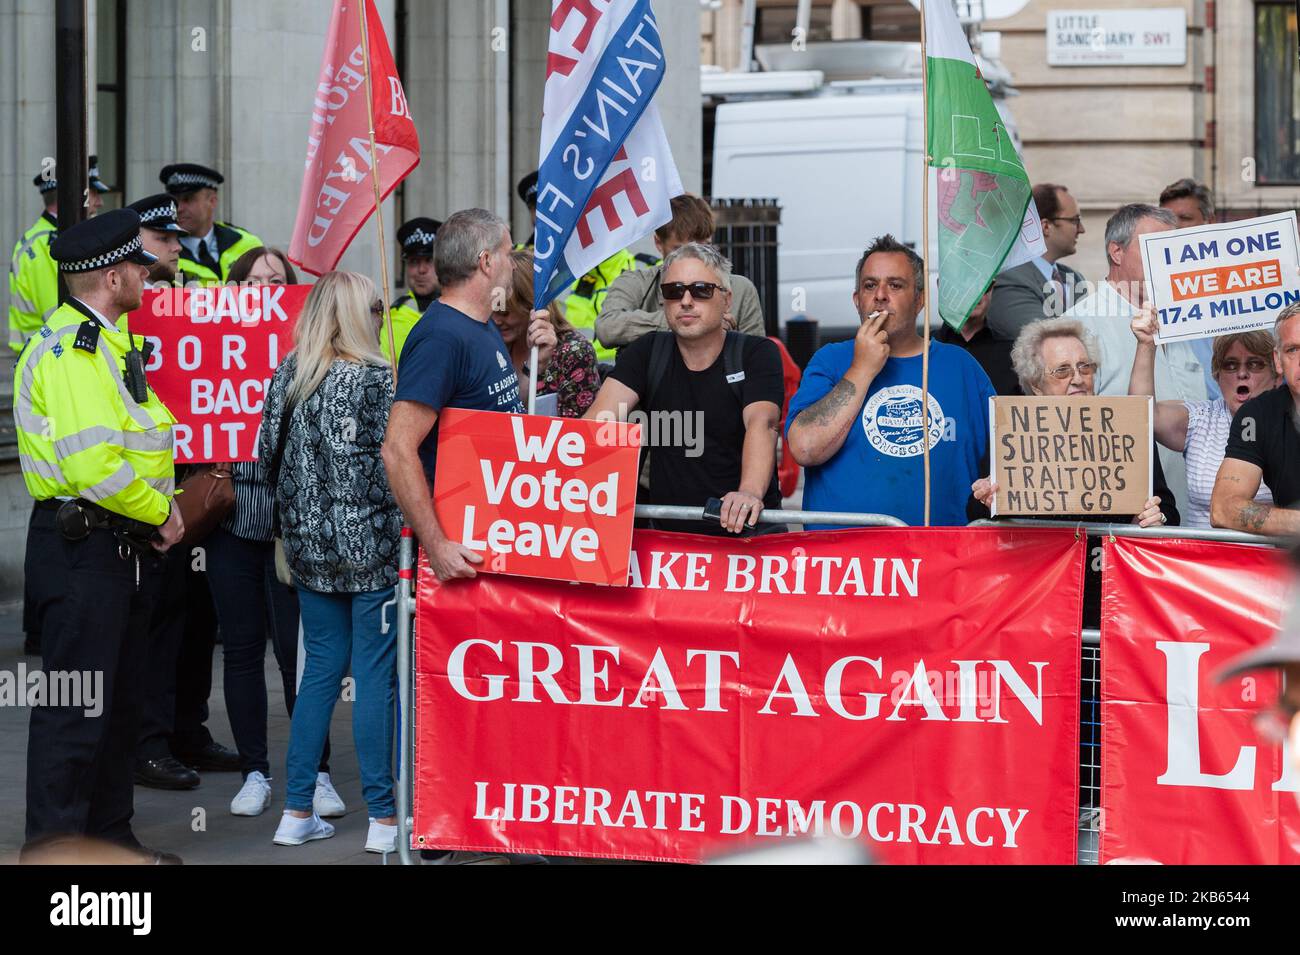 Pro-Brexit supporters of Boris Johnson protest outside the Supreme Court on 17 September, 2019 in London, England. Today, the Supreme Court judges begin a three-day hearing over the claim that Prime Minister Boris Johnson acted unlawfully in advising the Queen to prorogue parliament for five weeks in order to prevent MPs from debating the Brexit crisis. (Photo by WIktor Szymanowicz/NurPhoto) Stock Photo